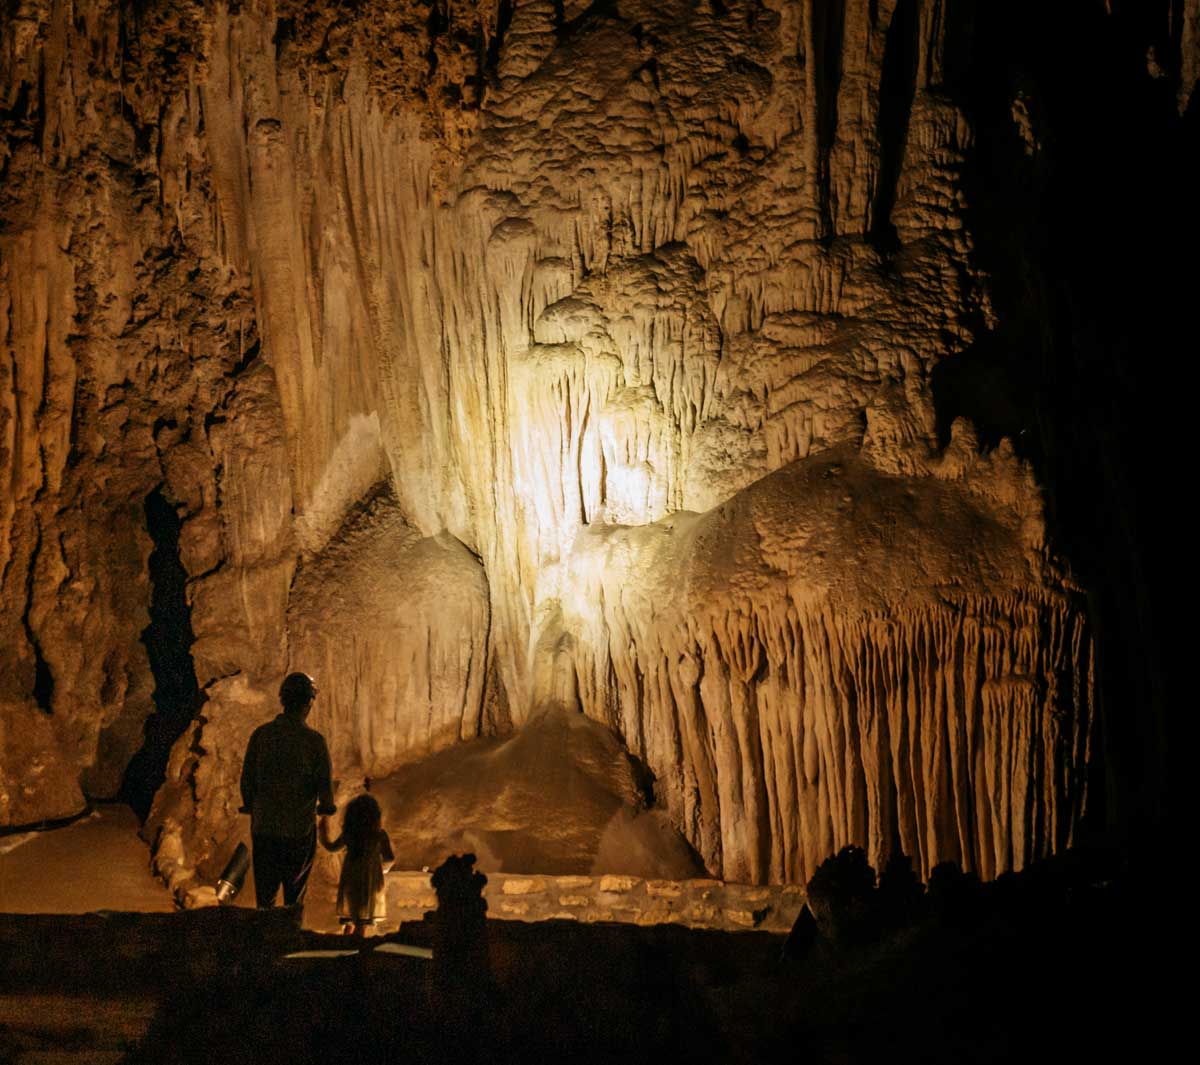 A man and child observe flow stone formations in Carlsbad Caverns